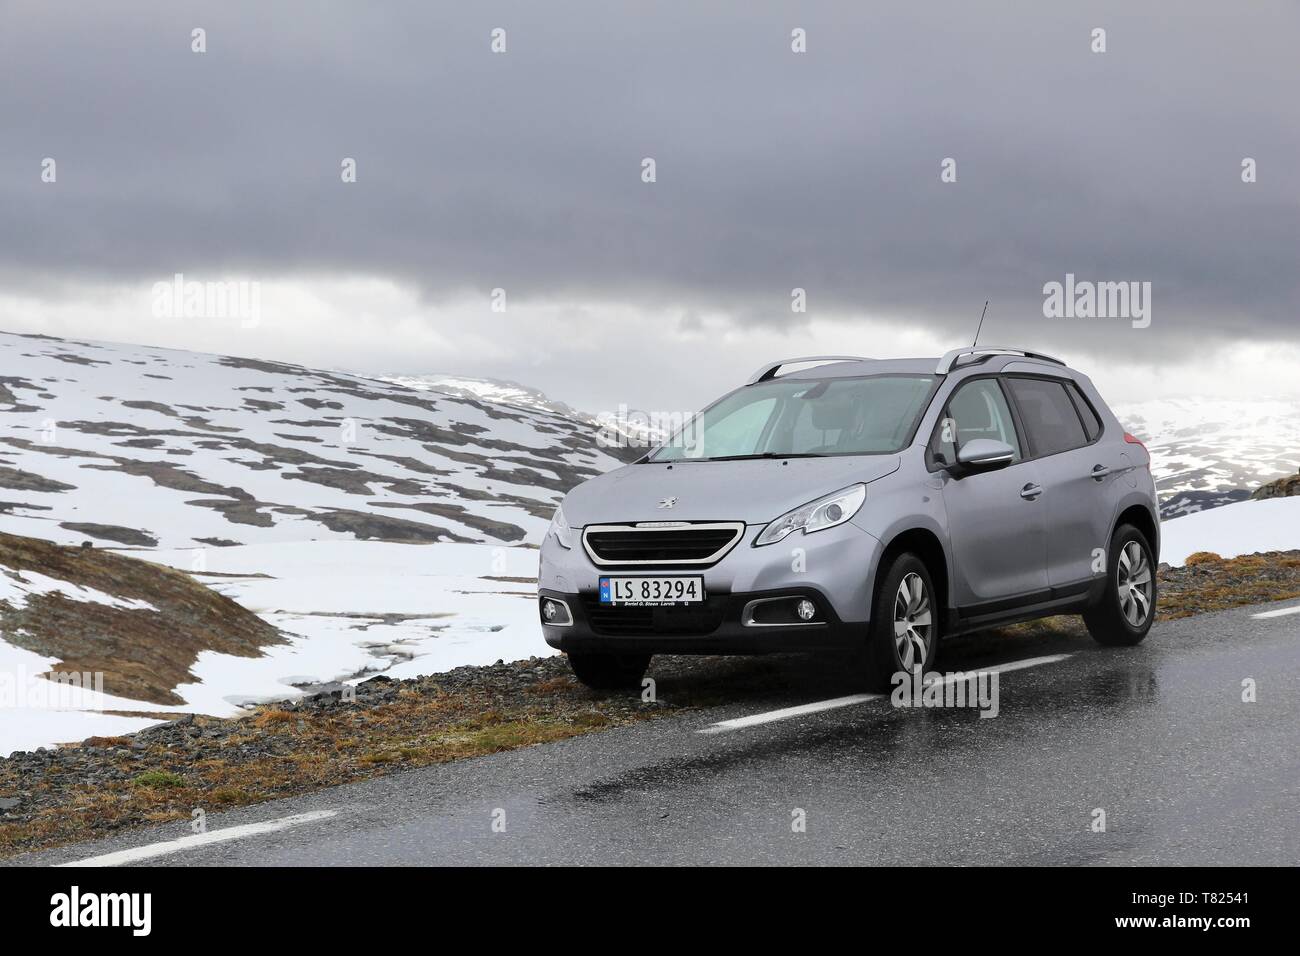 SOGN OG FJORDANE, NORWAY - JULY 18, 2015: Crossover hatchback-SUV Peugeot 2008 parked in Norway. Peugeot manufactures more than 1.7 million vehicles a Stock Photo